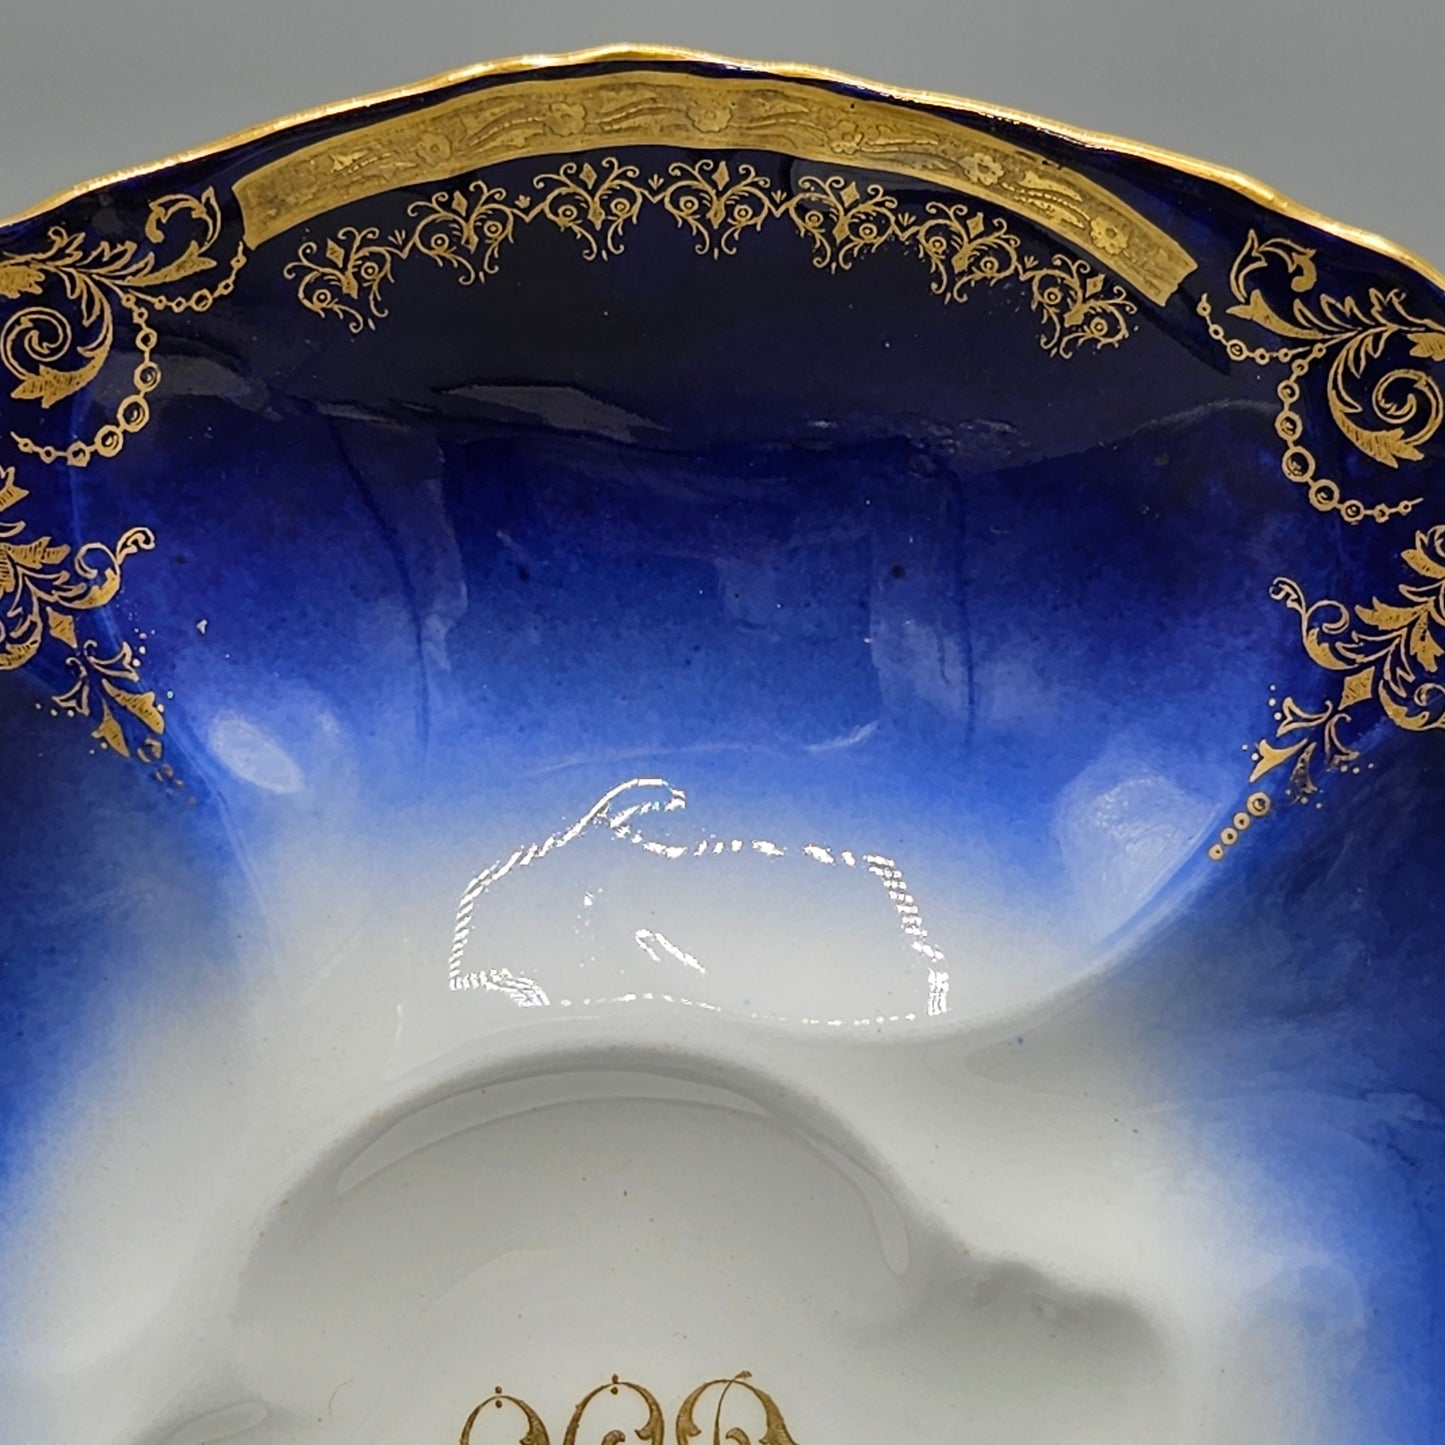 OP Co Onondaga Pottery (Syracuse China) Cobalt Blue Ground Oyster Plate